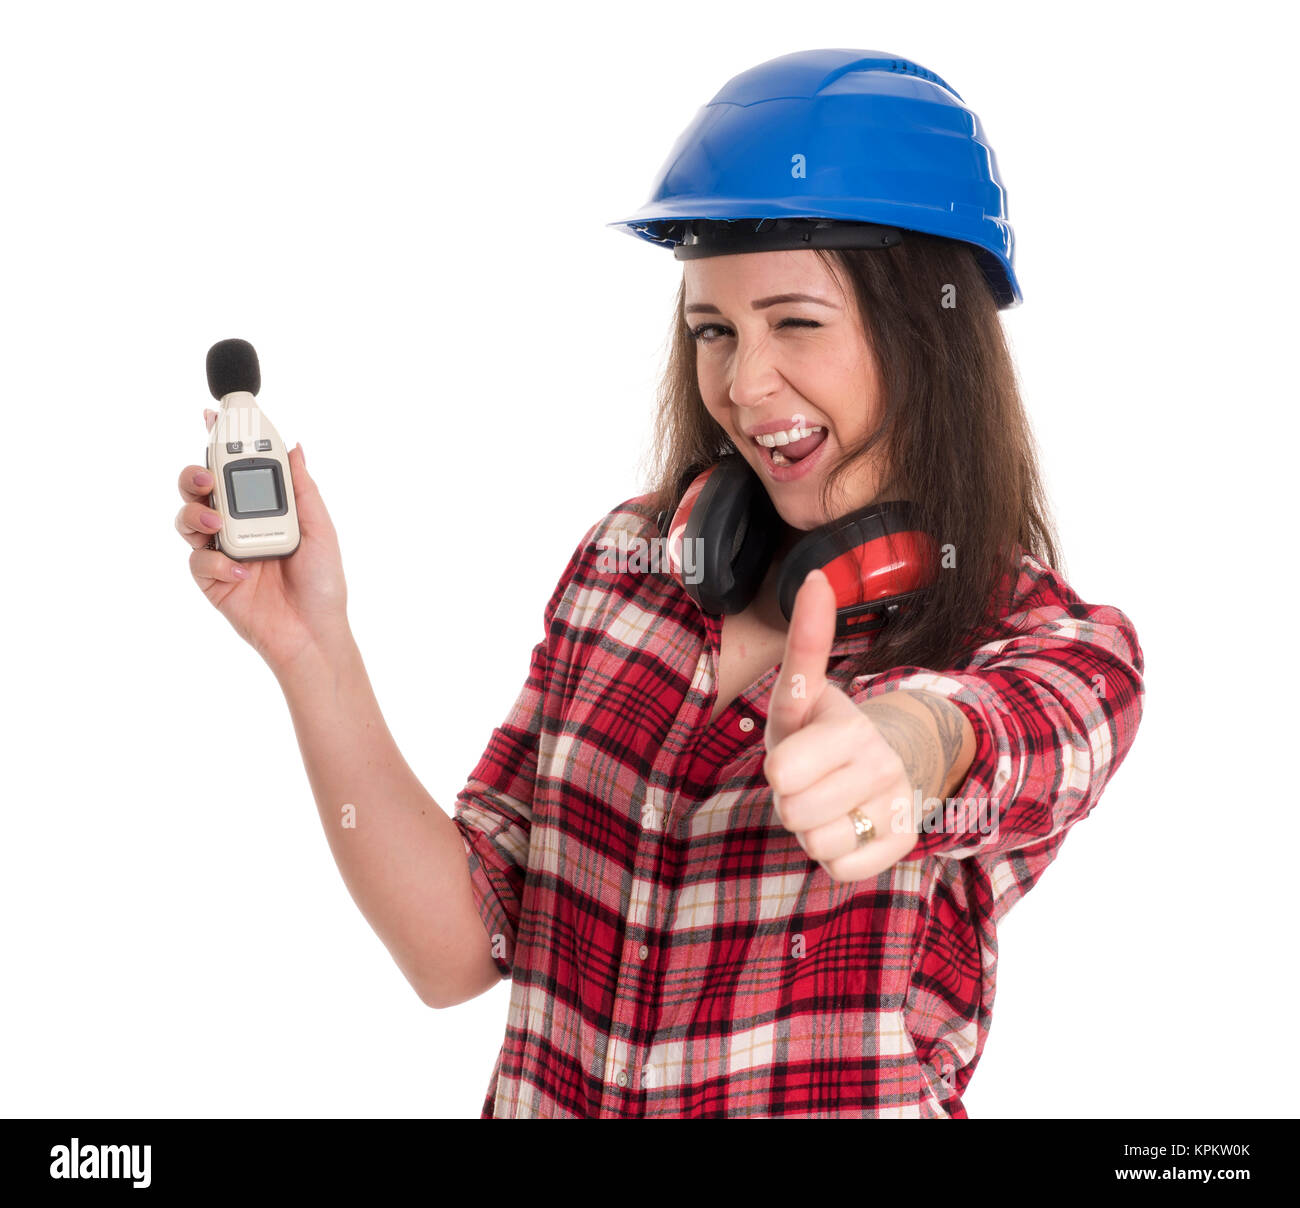 craftsmen measures the noise level and showing thumbs up Stock Photo